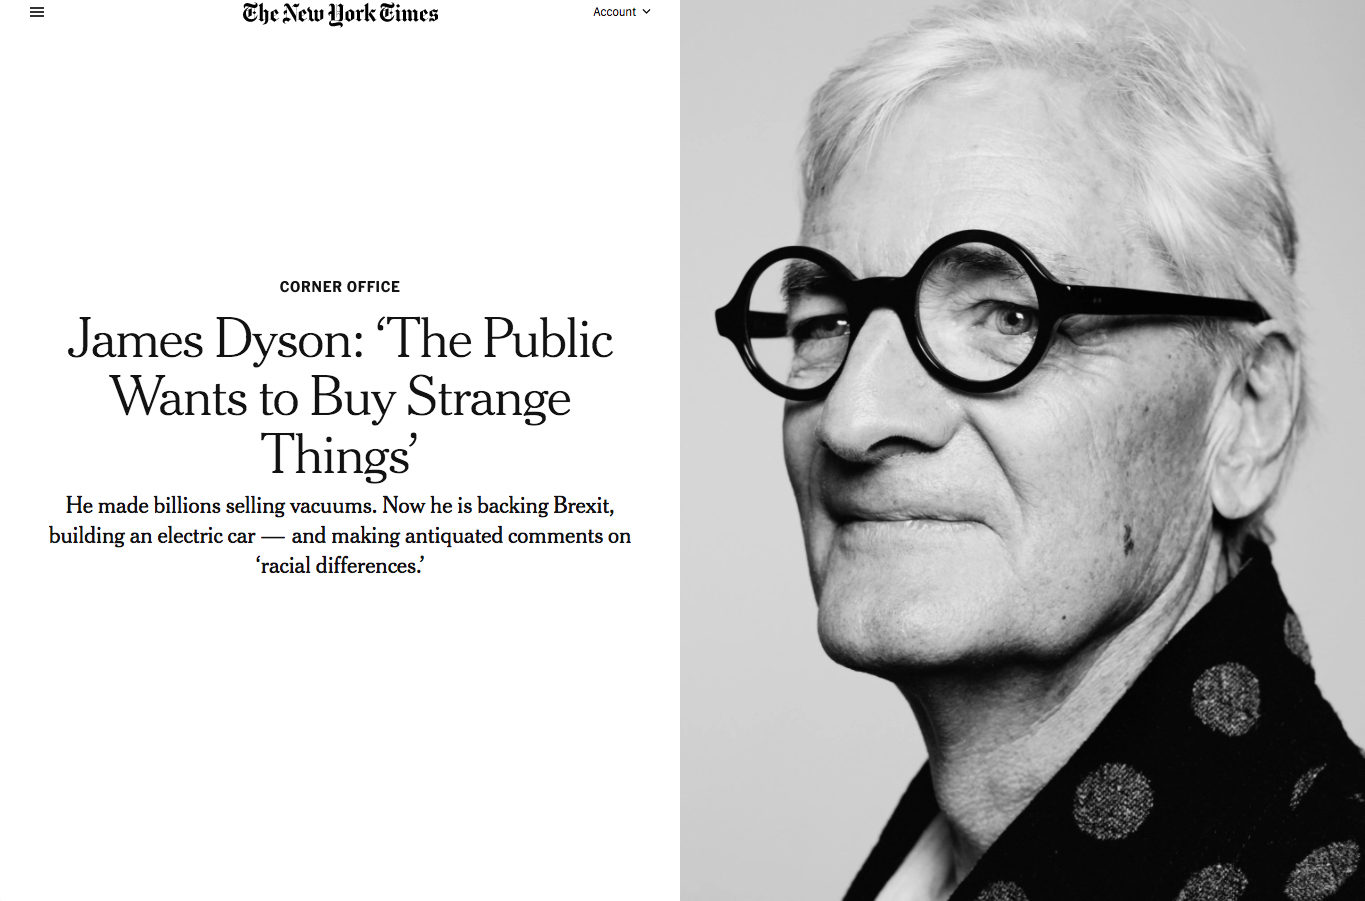 James Dyson: ‘The Public Wants to Buy Strange Things’